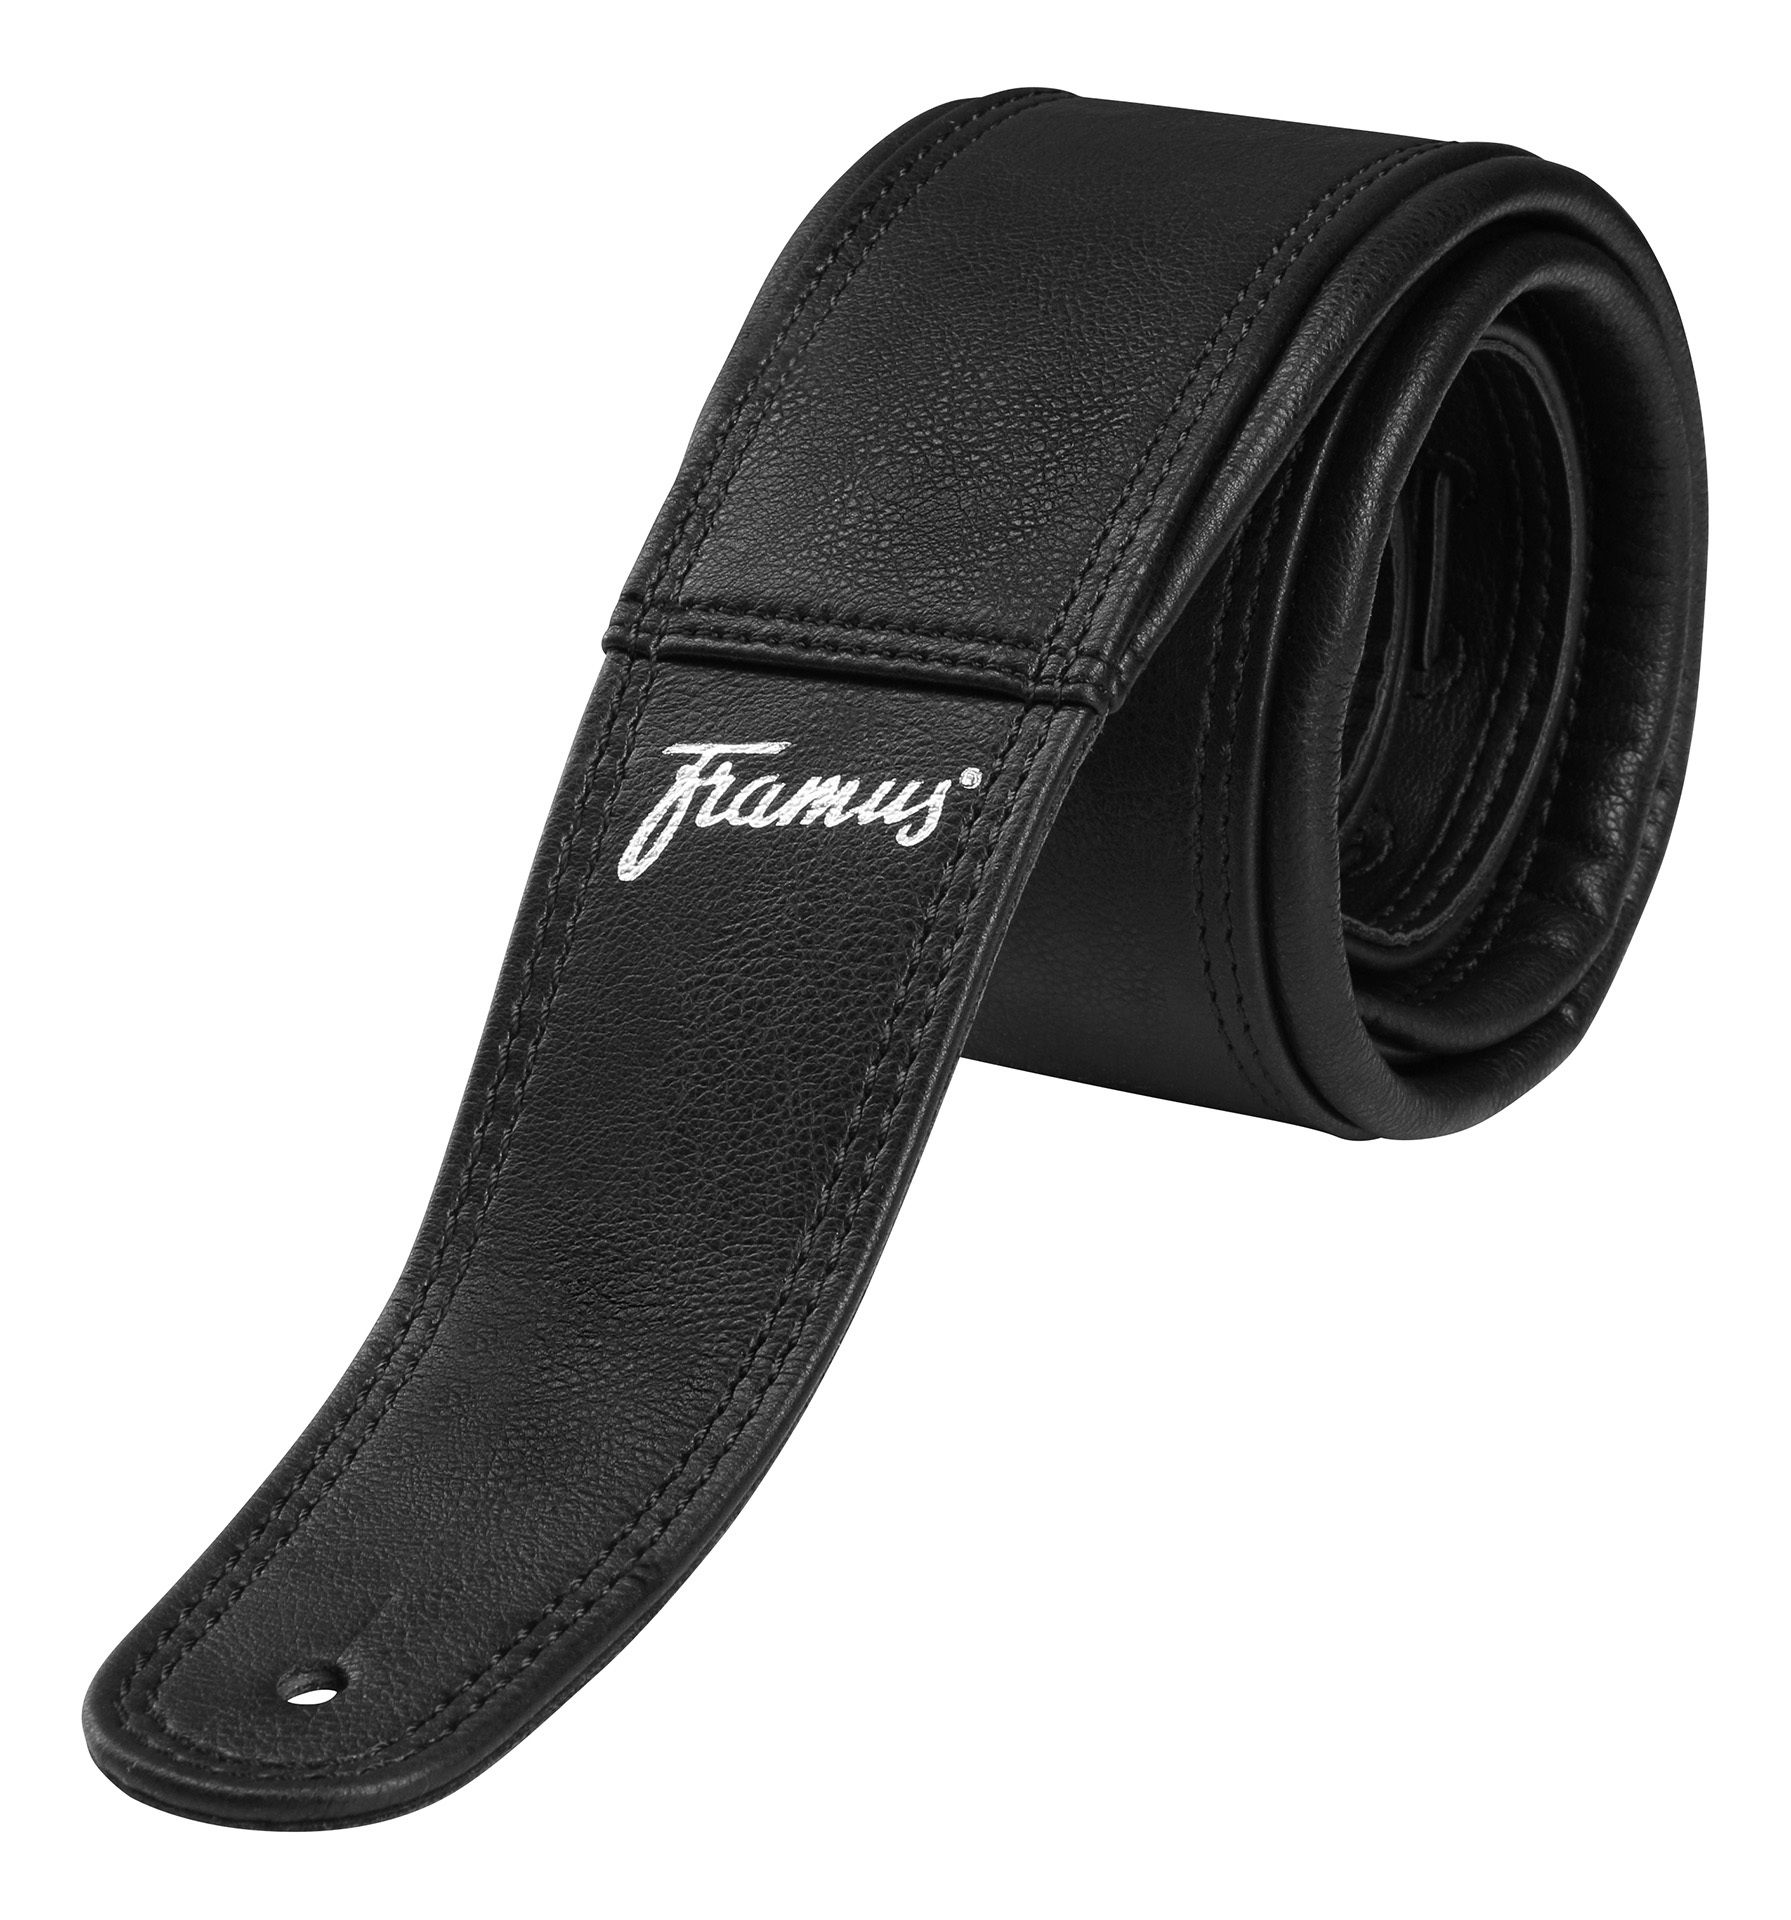 Framus Teambuilt Synthetic Leather Guitar Strap - Black, Silver Embossing